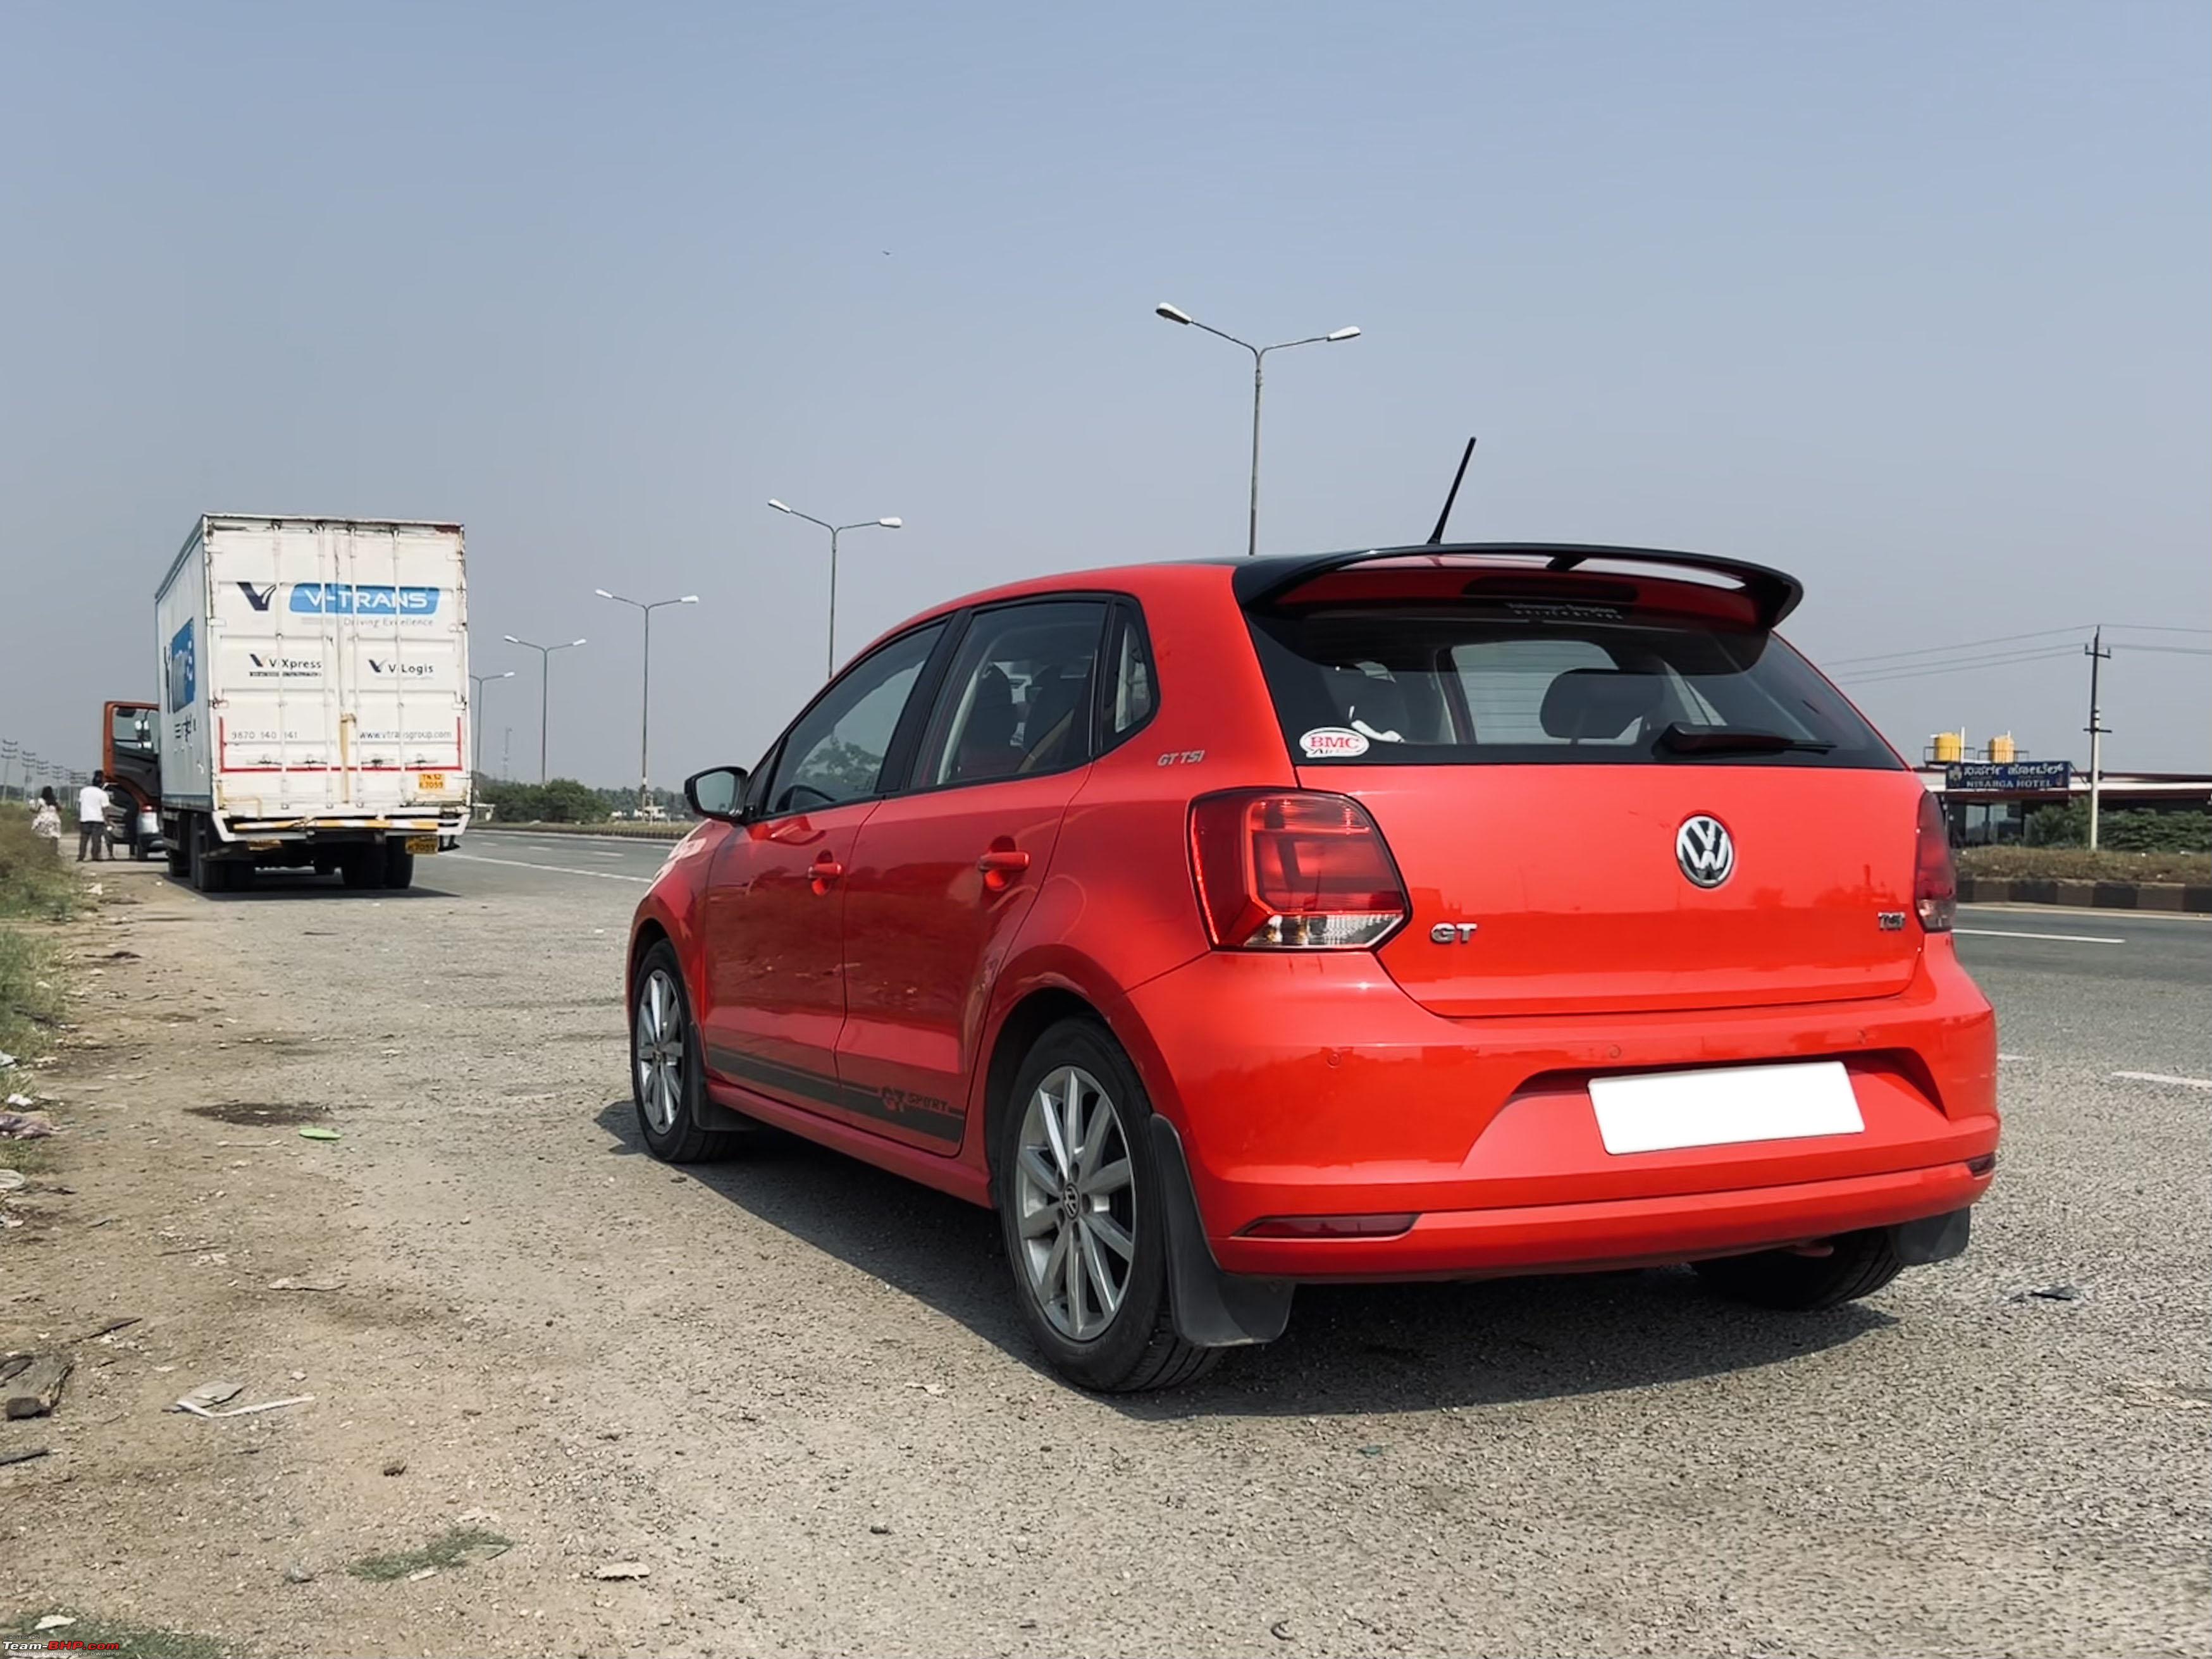 Volkswagen Polo GTI 2018 New Car Review